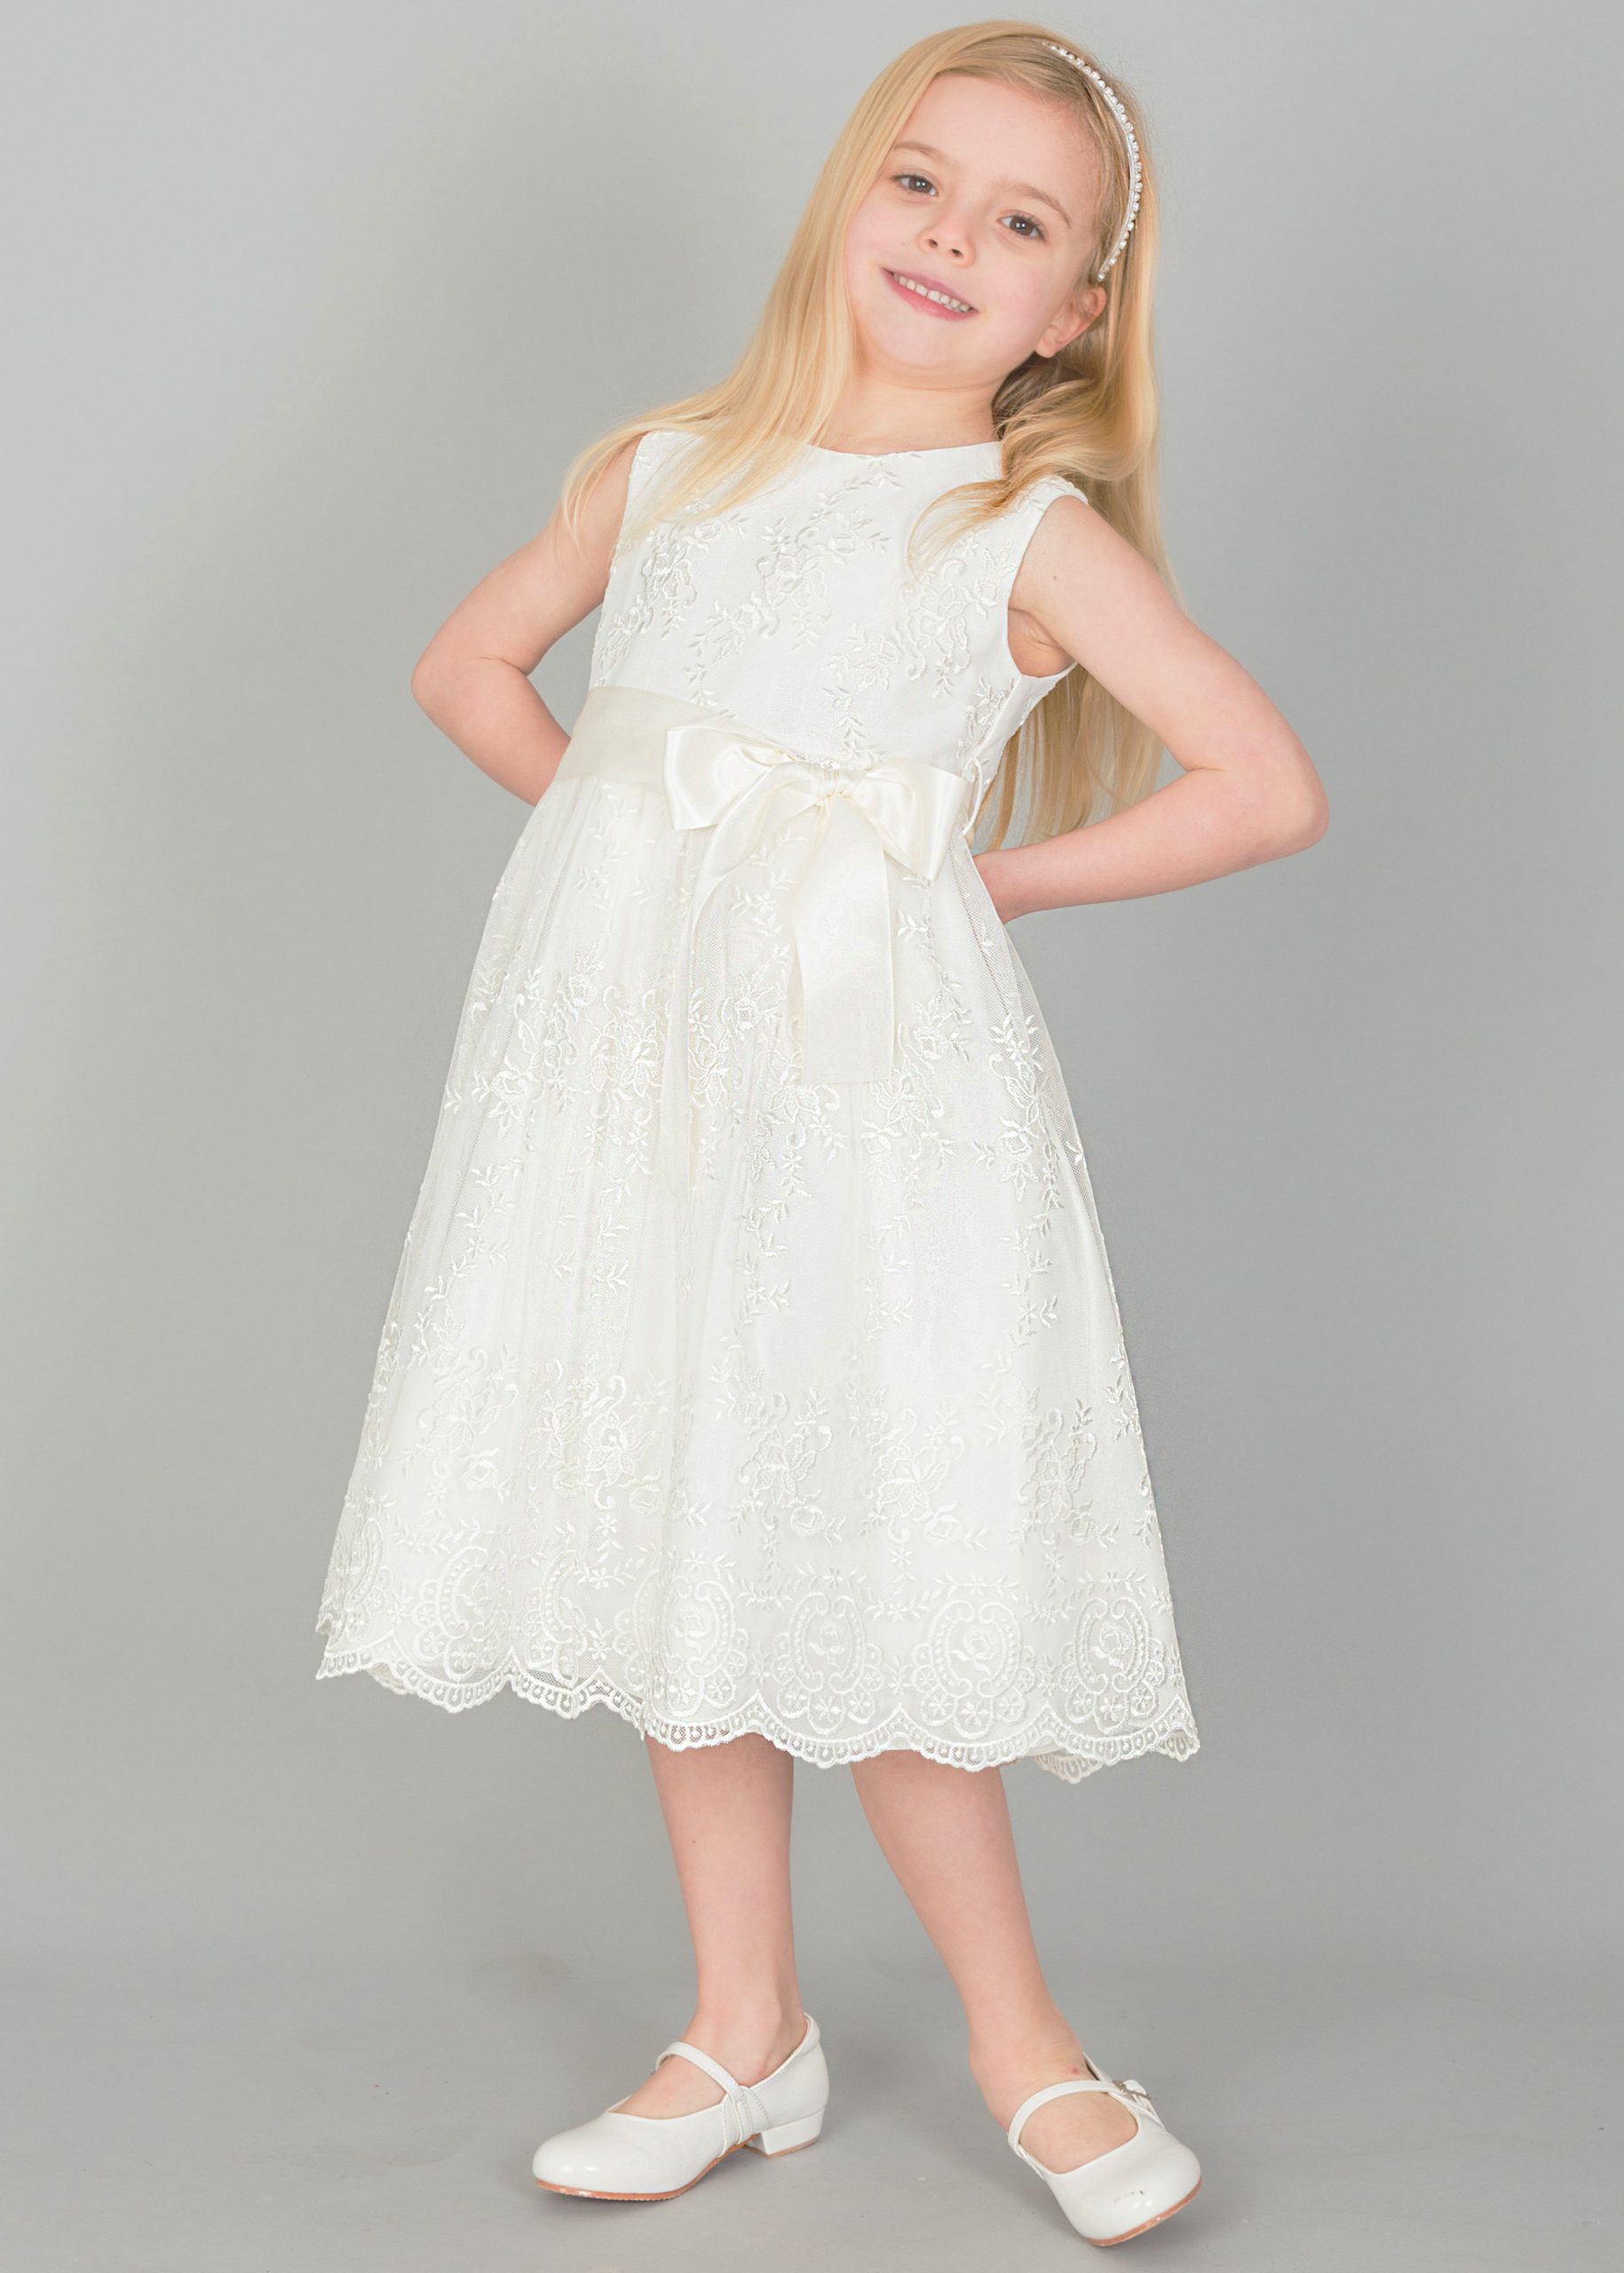 Girls Lace dress with Bow in IVORY | Little Giants Ltd